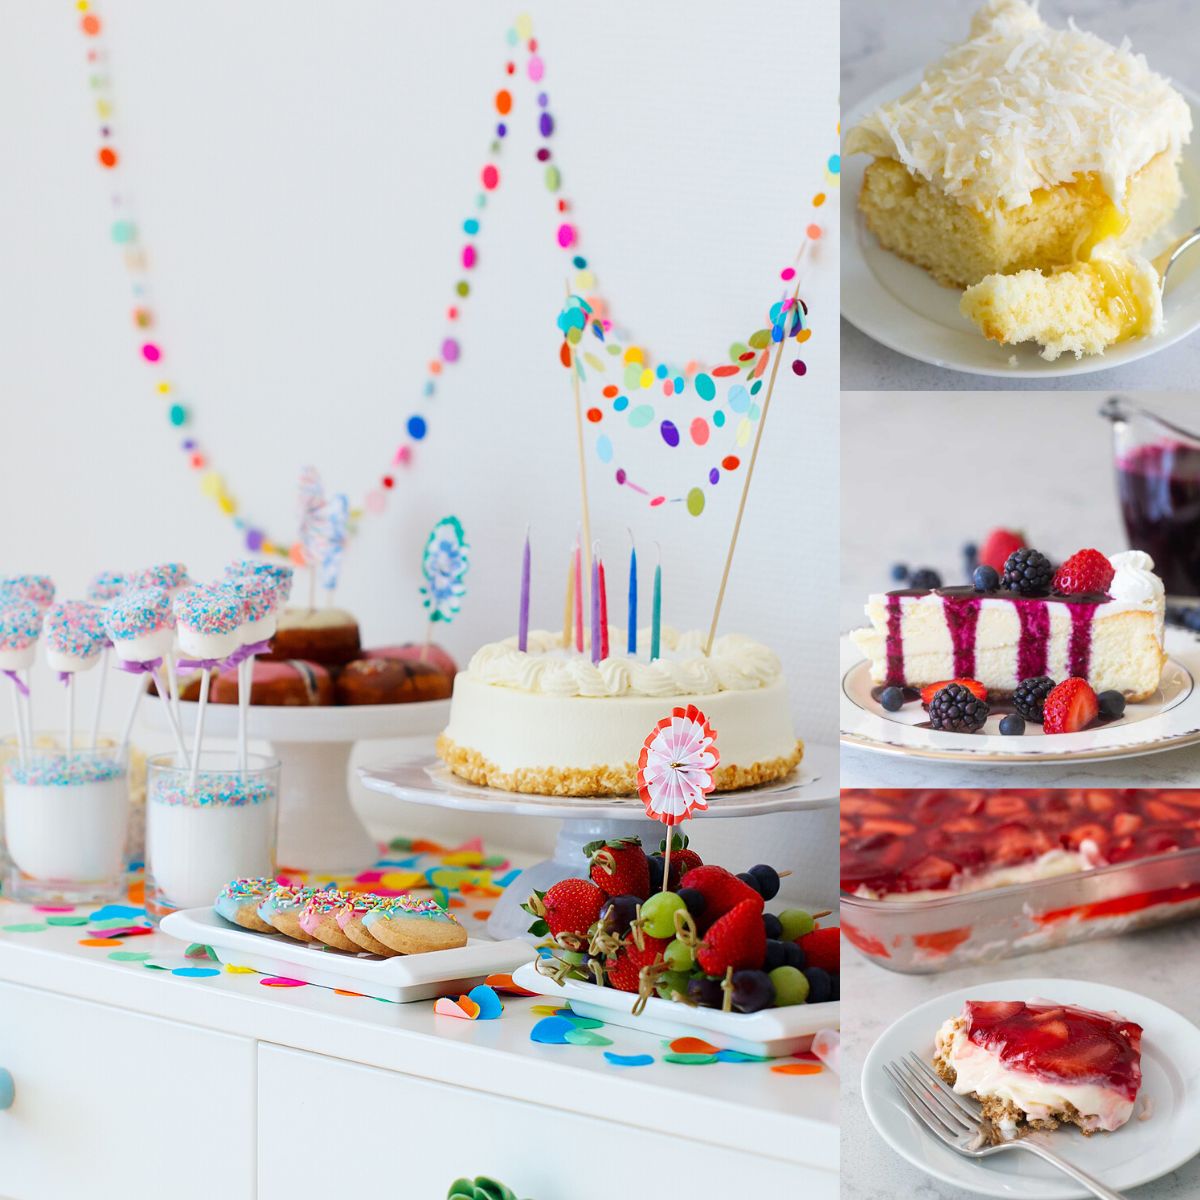 A photo collage shows a party desserts table alongside 3 photos of easy dessert recipes.